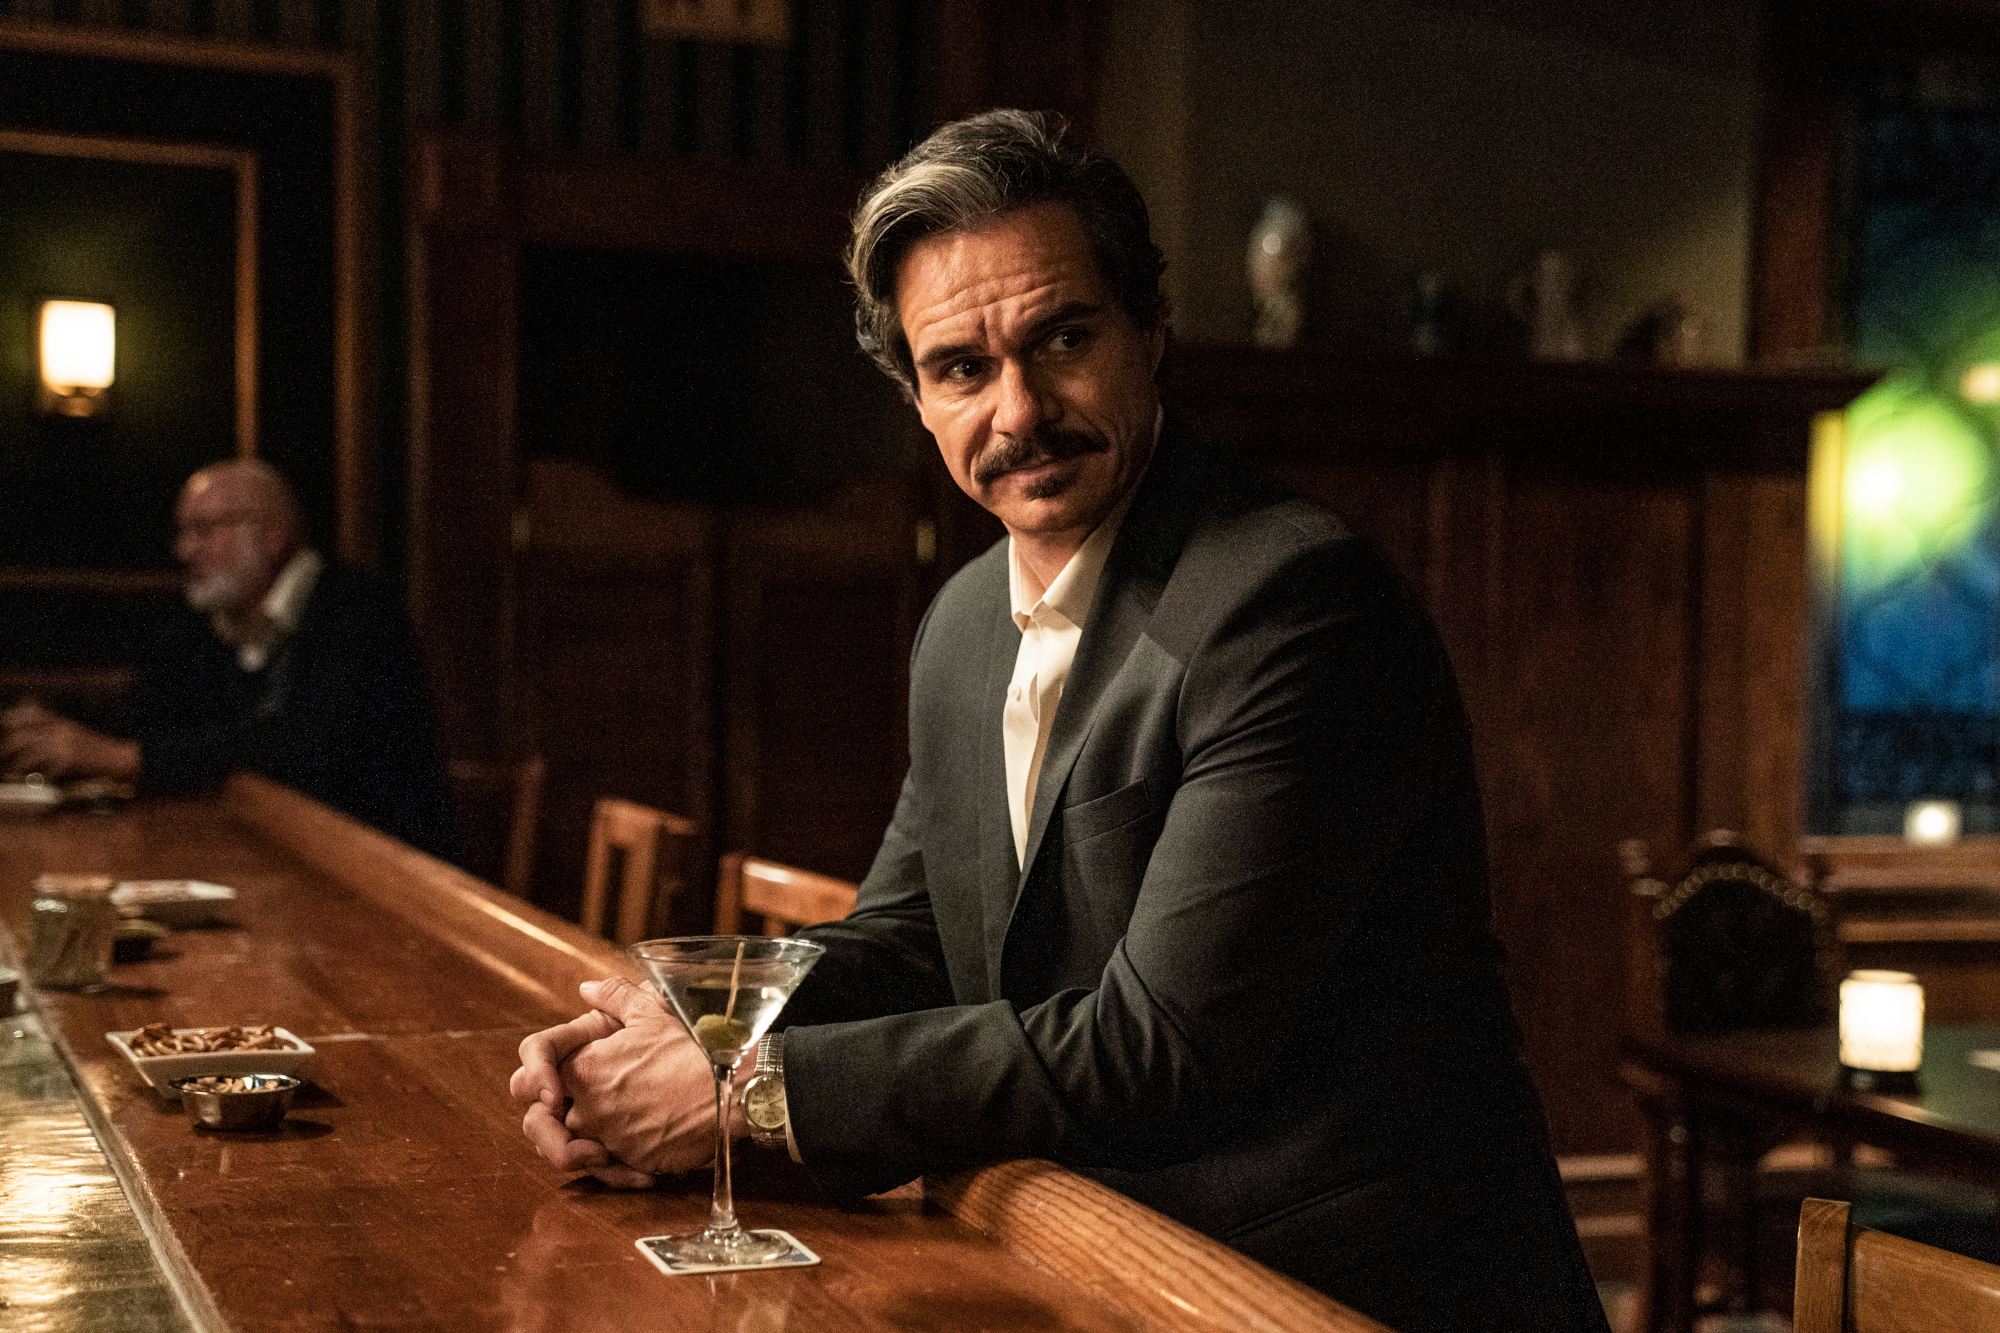 Tony Dalton as Lalo Salamanca in 'Better Call Saul' Season 6 Part 1, which leaves him wanting revenge against Gus in part 2. He's leaning against a bar, wearing a black suit, and smiling.